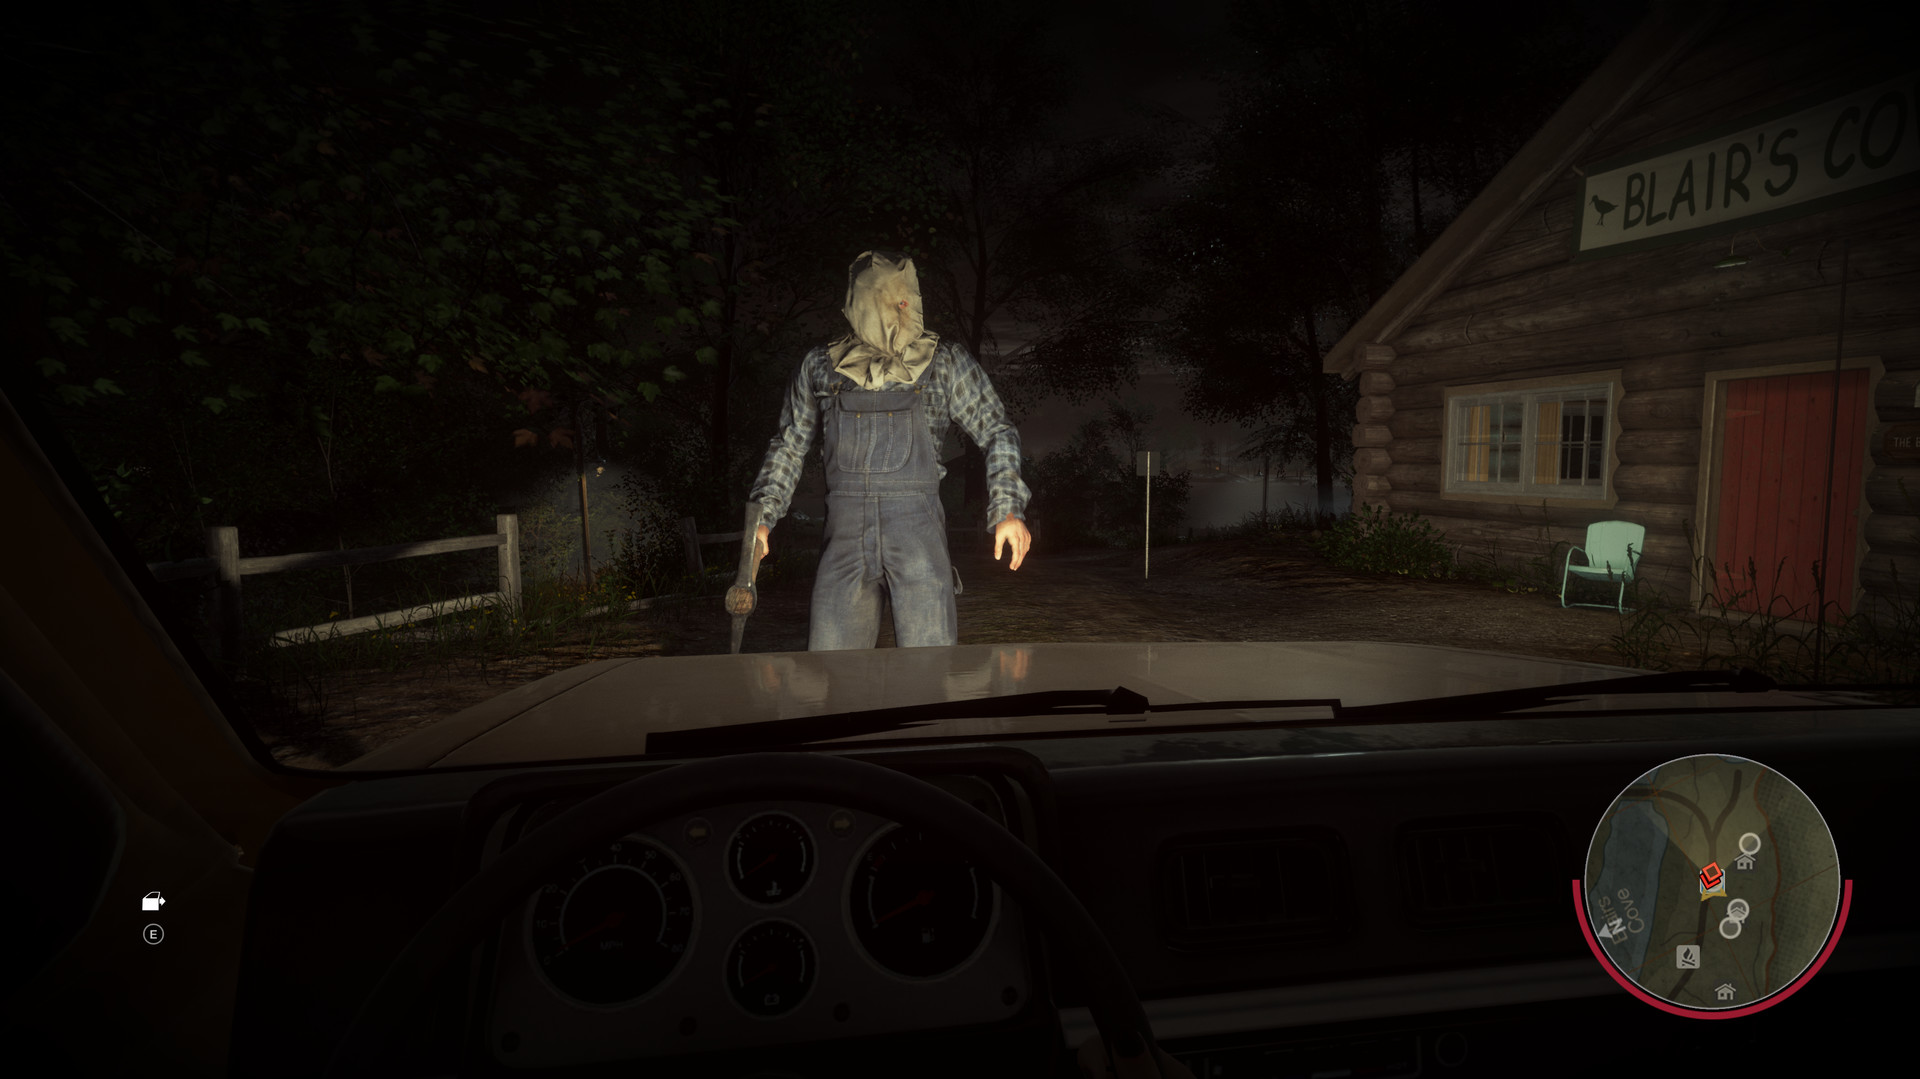 Friday the 13th: The Game System Requirements - Can I Run It